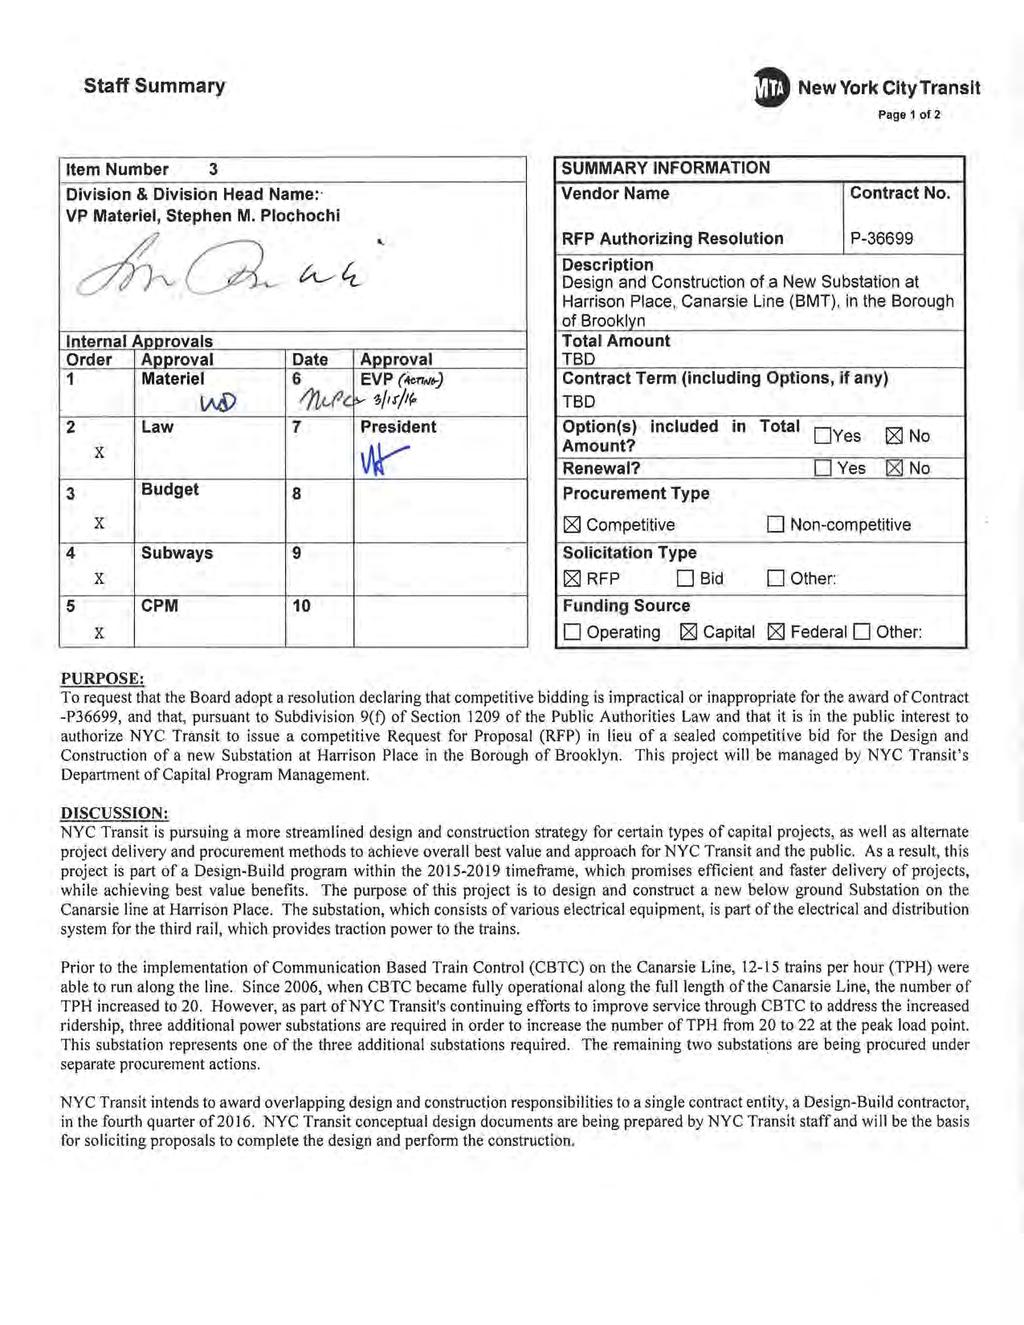 Staff Summary D New York CityTranslt Page 1 of 2 Item Number 3 Division & Division Head Name: VP Materiel, Stephen M. Plochochi ~a ~4.